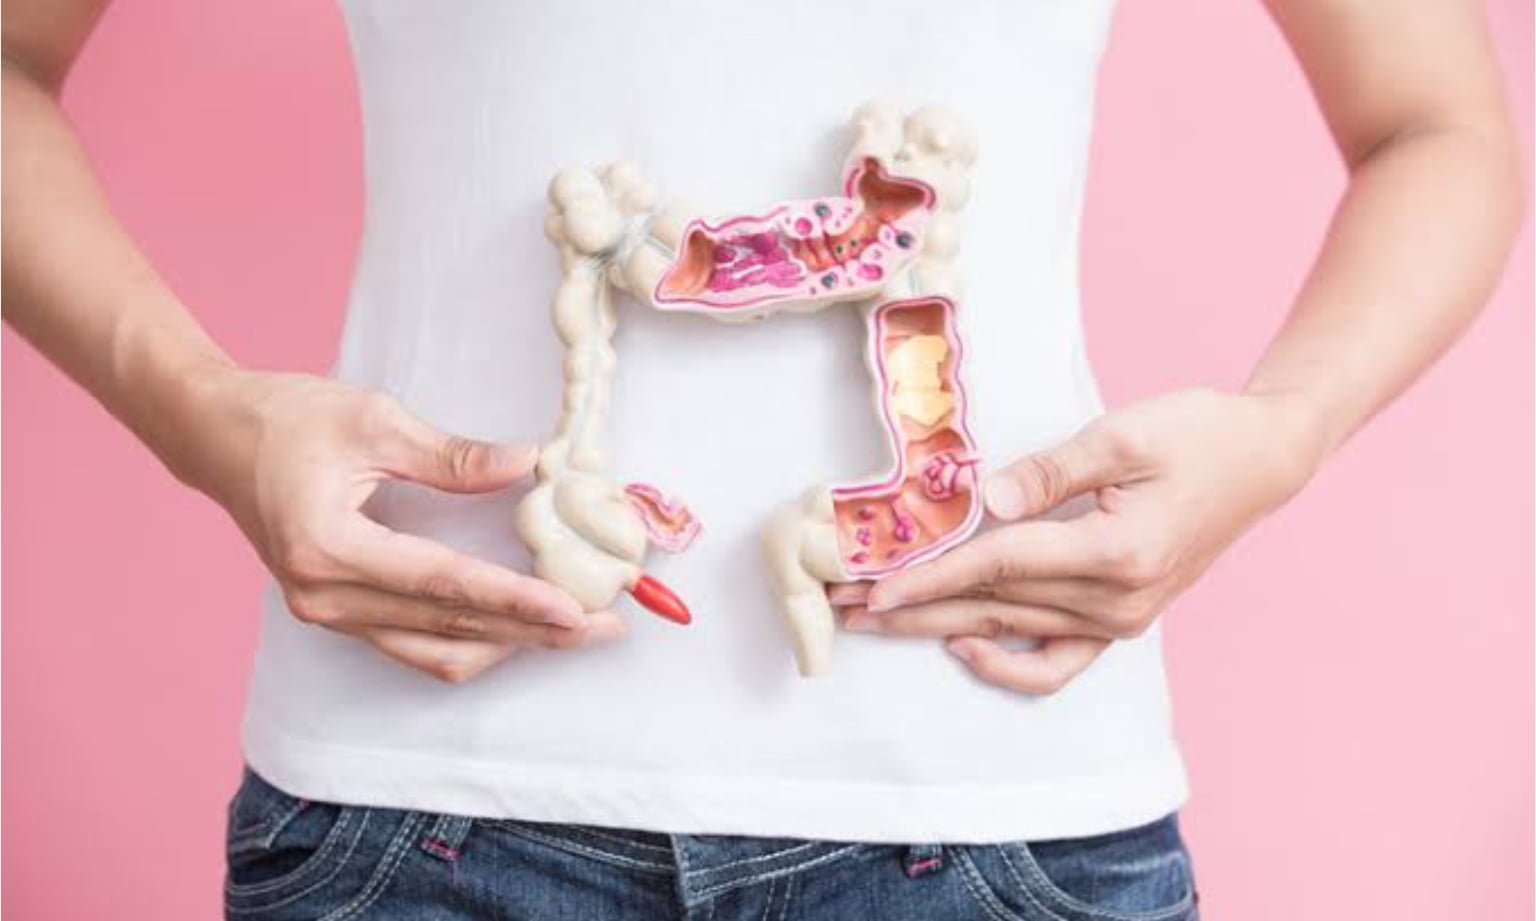 A Gut Protein Holds Promise for Treating Inflammatory Bowel Disease and Colorectal Cancer.